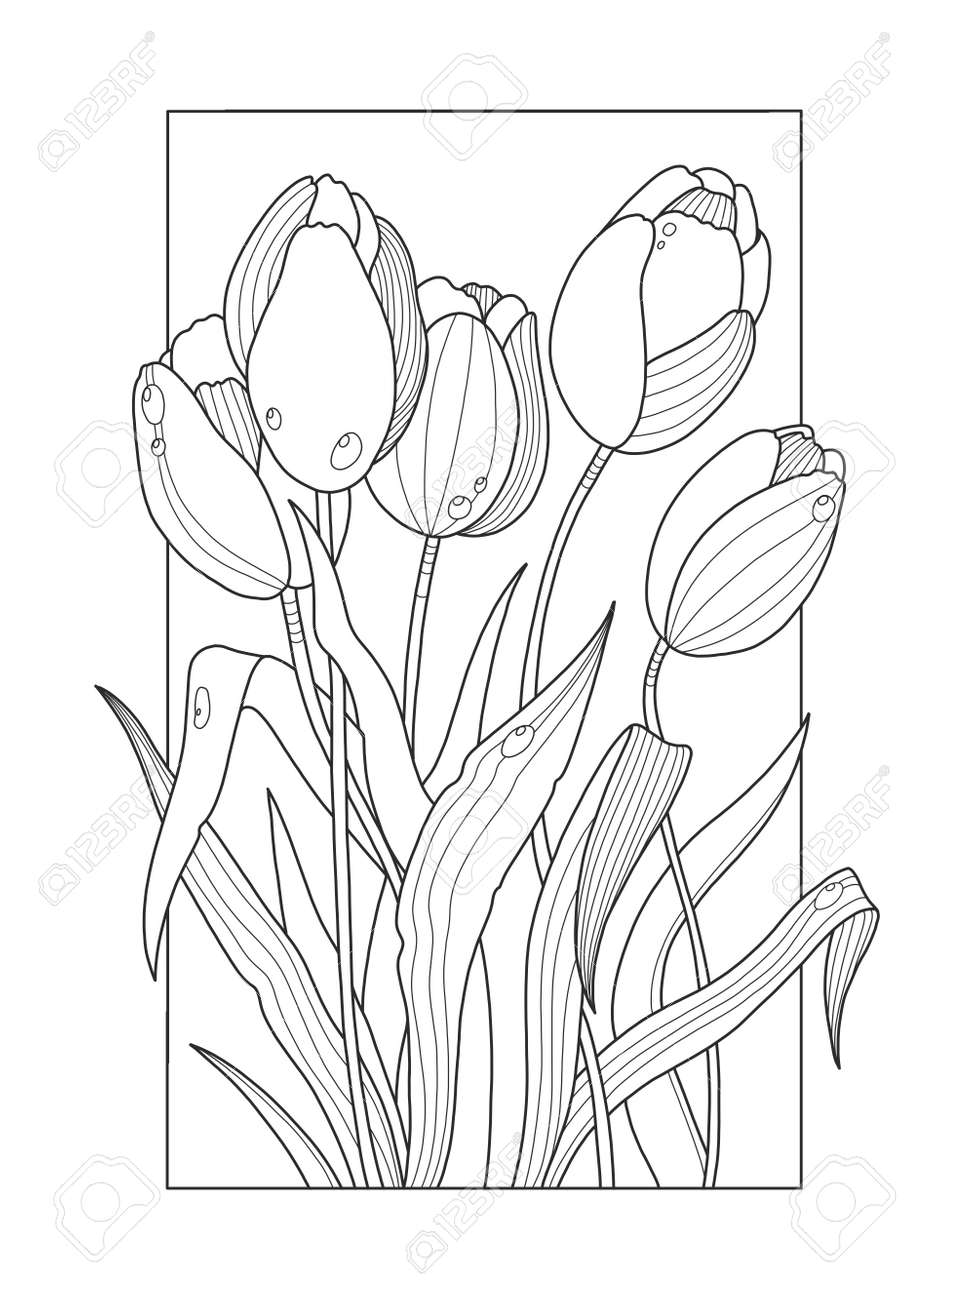 Tulip flowers coloring book vector illustration royalty free svg cliparts vectors and stock illustration image